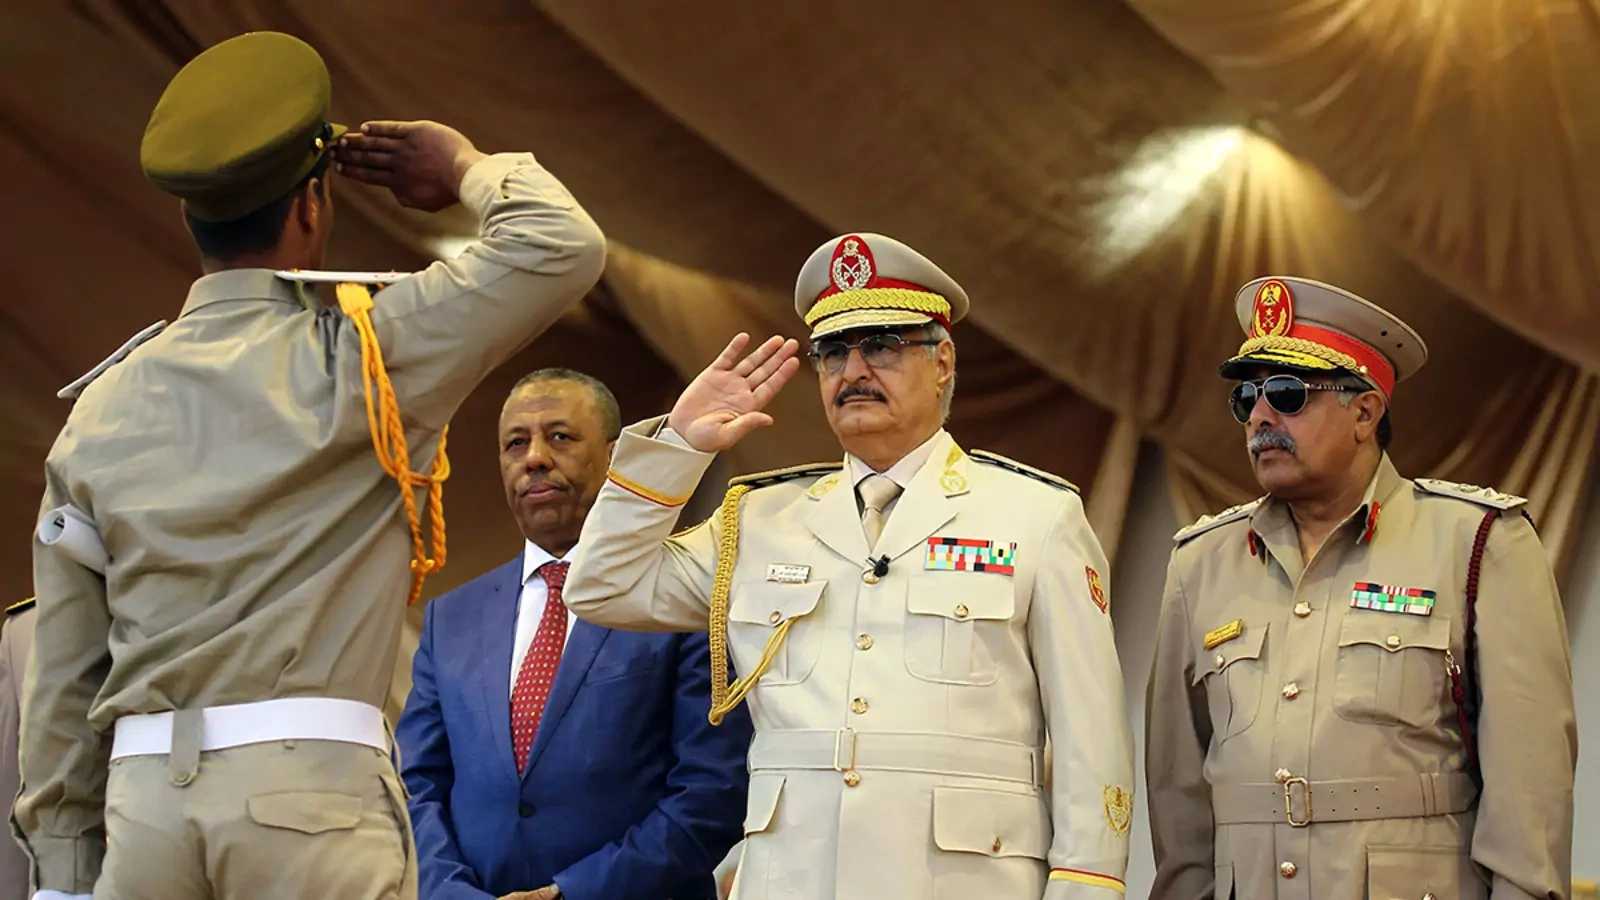 Khalifa Haftar (C), leader of the Libyan National Army, salutes next to his Chief Of Staff Abdelrazak al-Nadhuri (R) and Libyan former prime minister Abdullah al-Thani